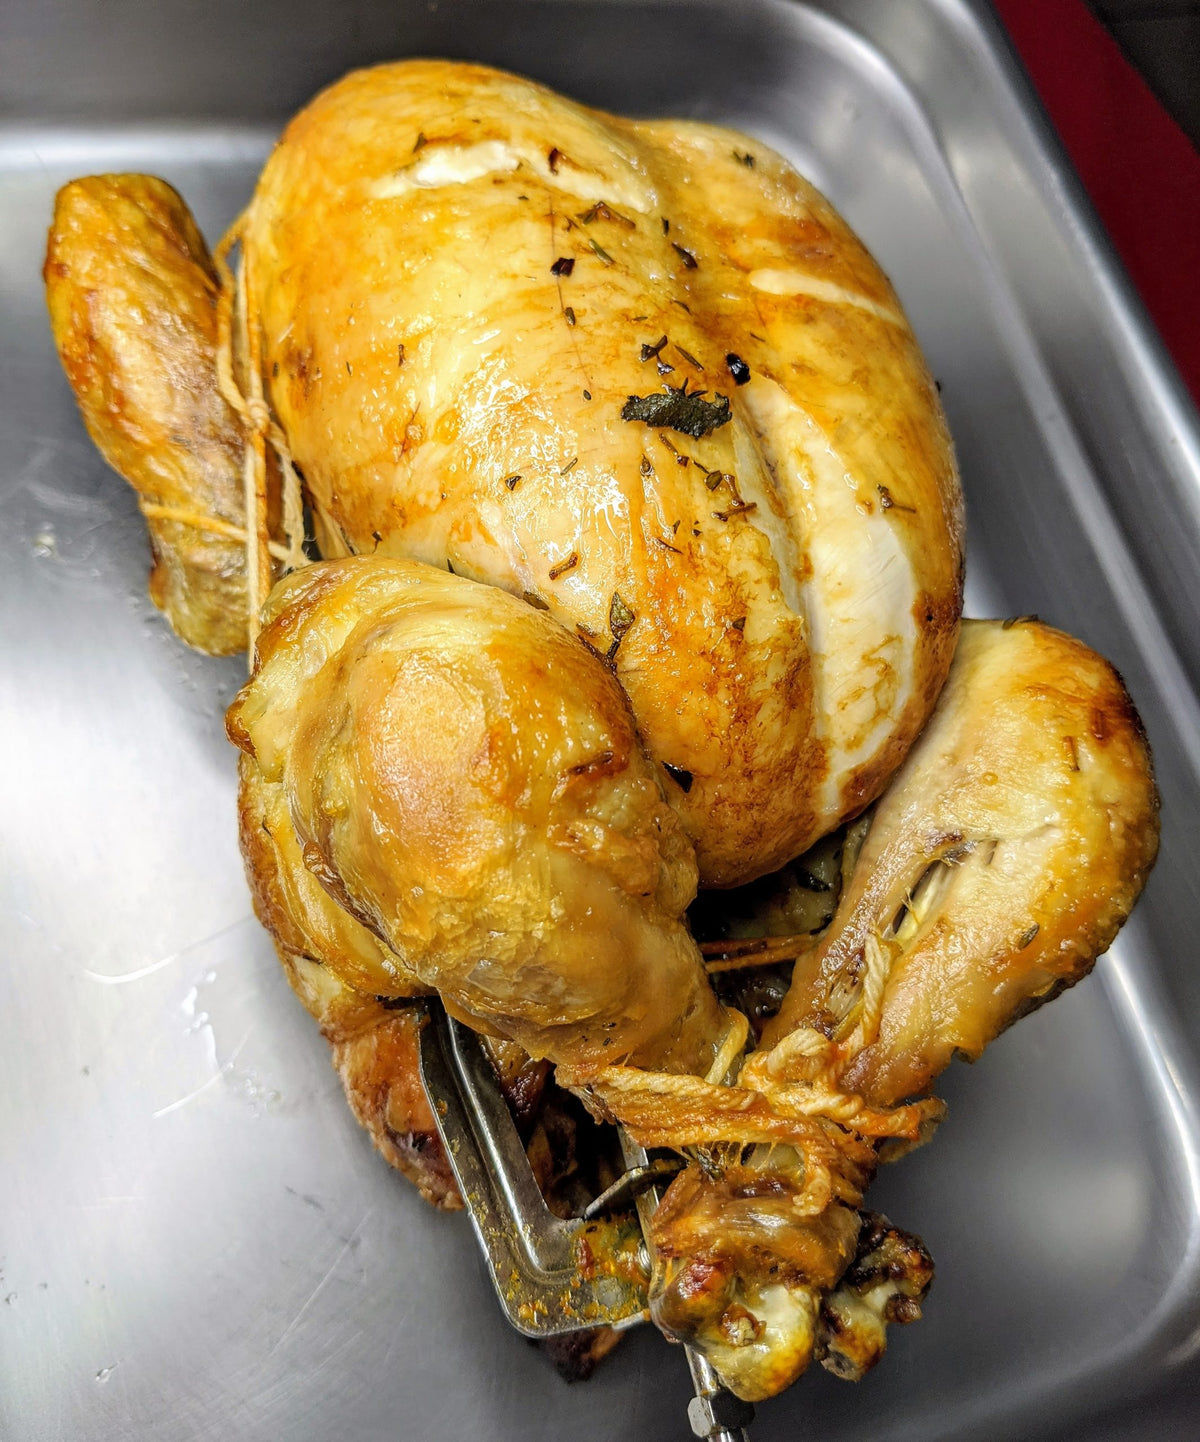 Frozen Organic Air-Chilled, All Natural Whole Chicken